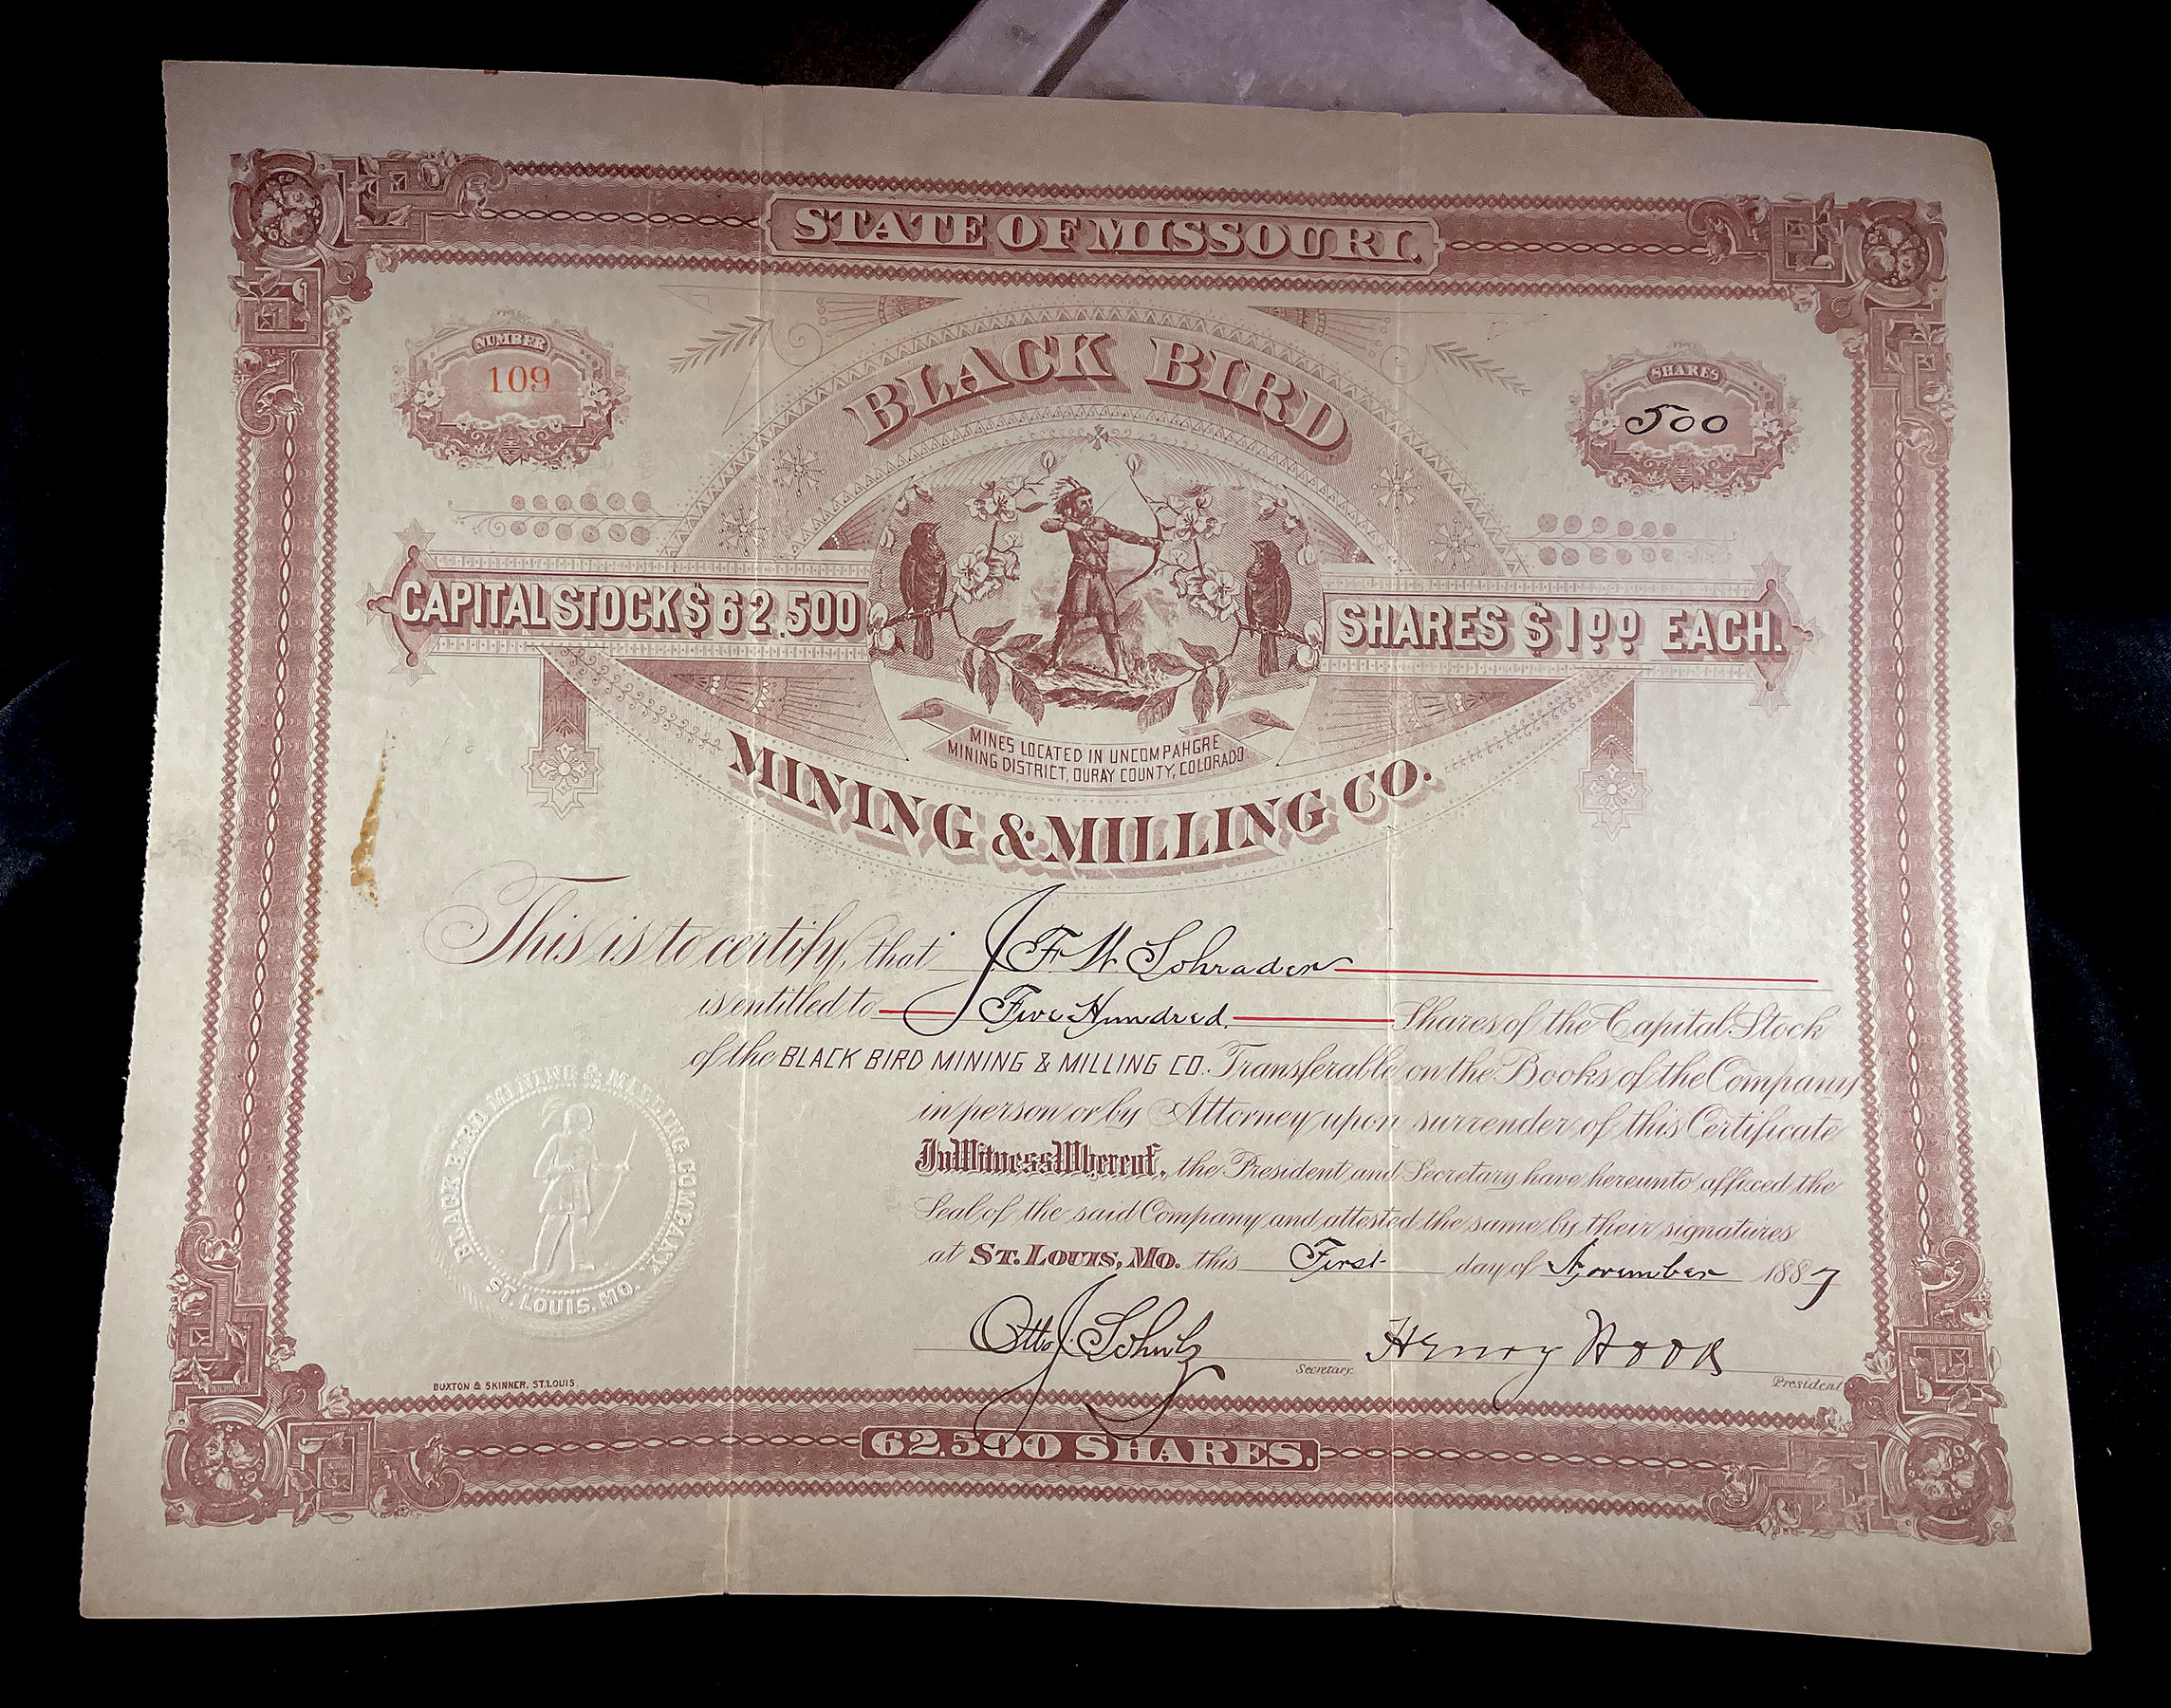 BLACK BIRD MINING & MILLING COMPANY Ouray County Colorado mining stock certificate 1887